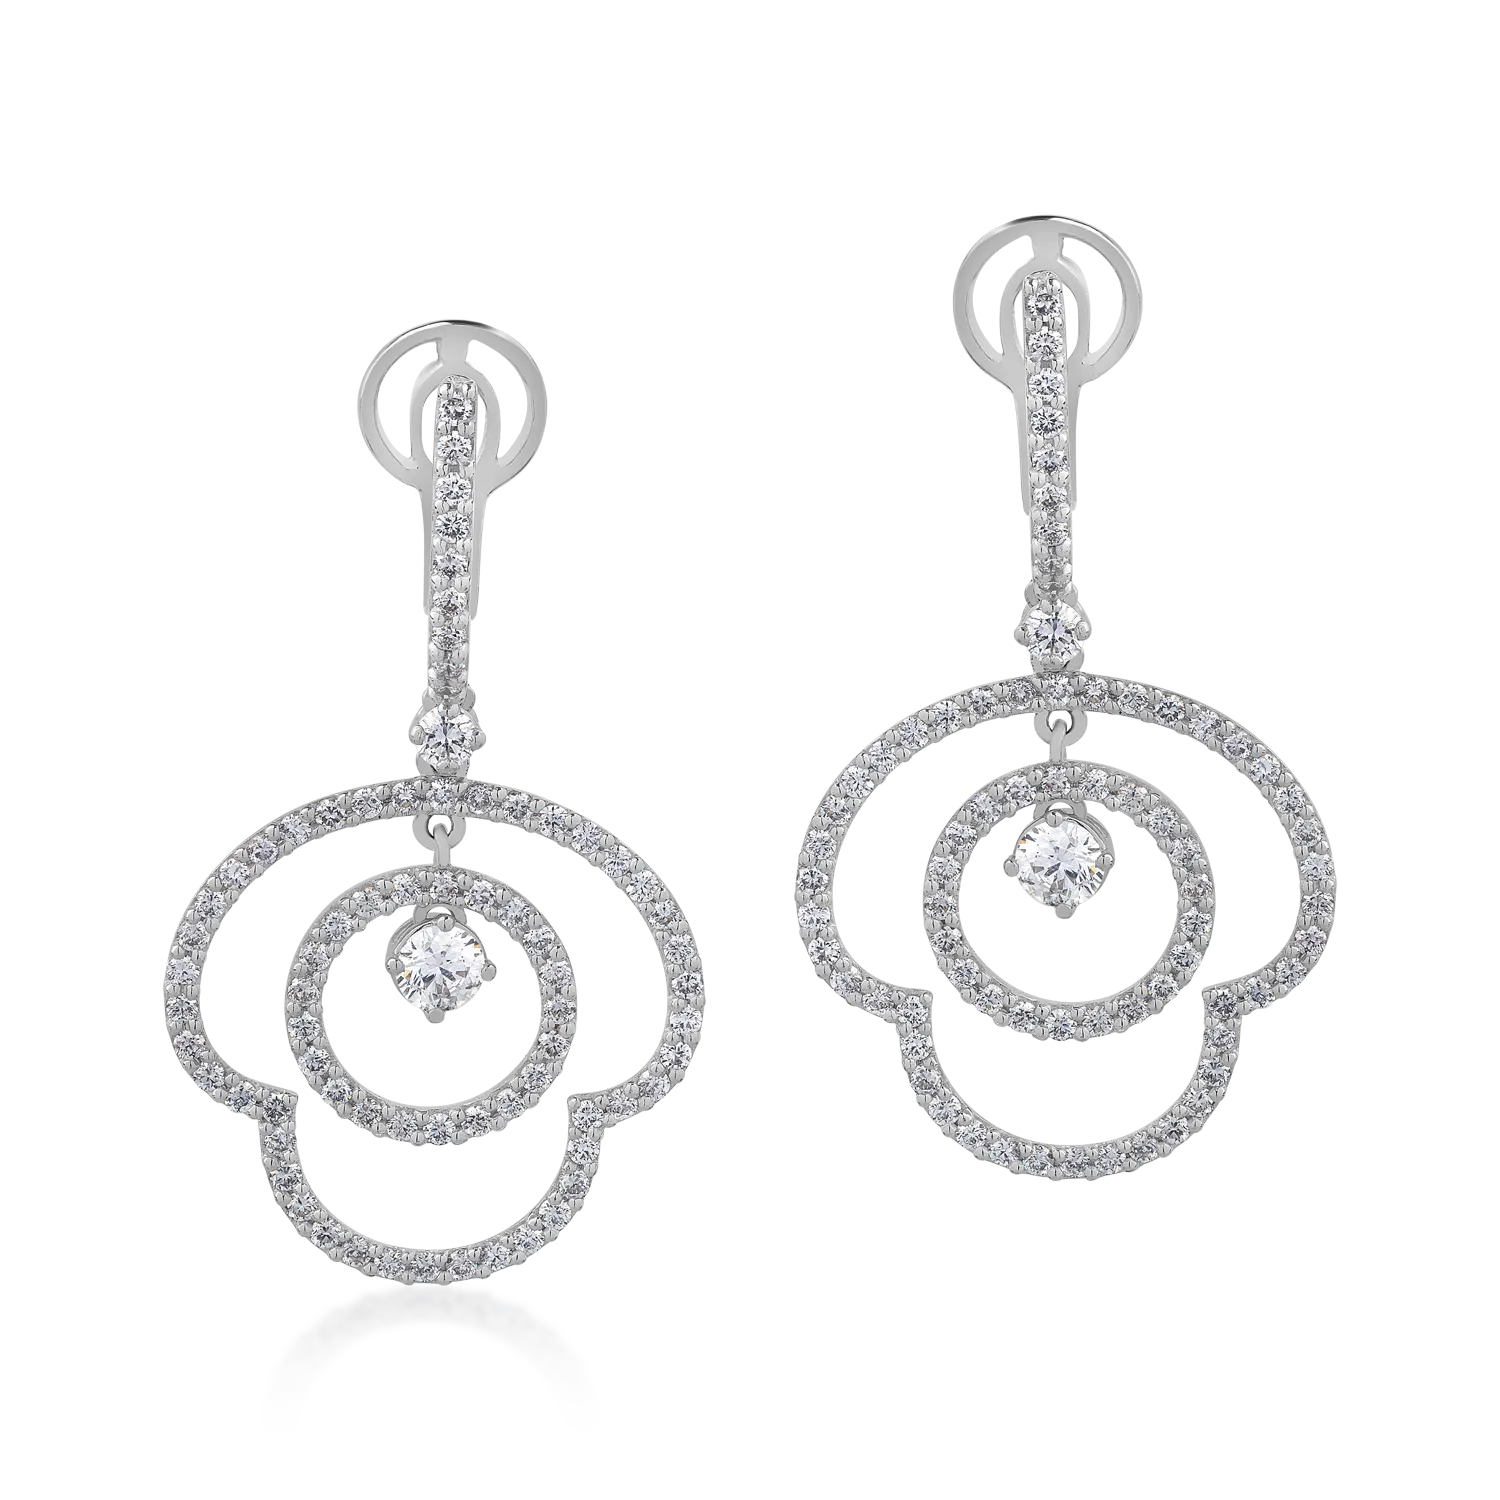 18K white gold earrings with 2.33ct diamonds